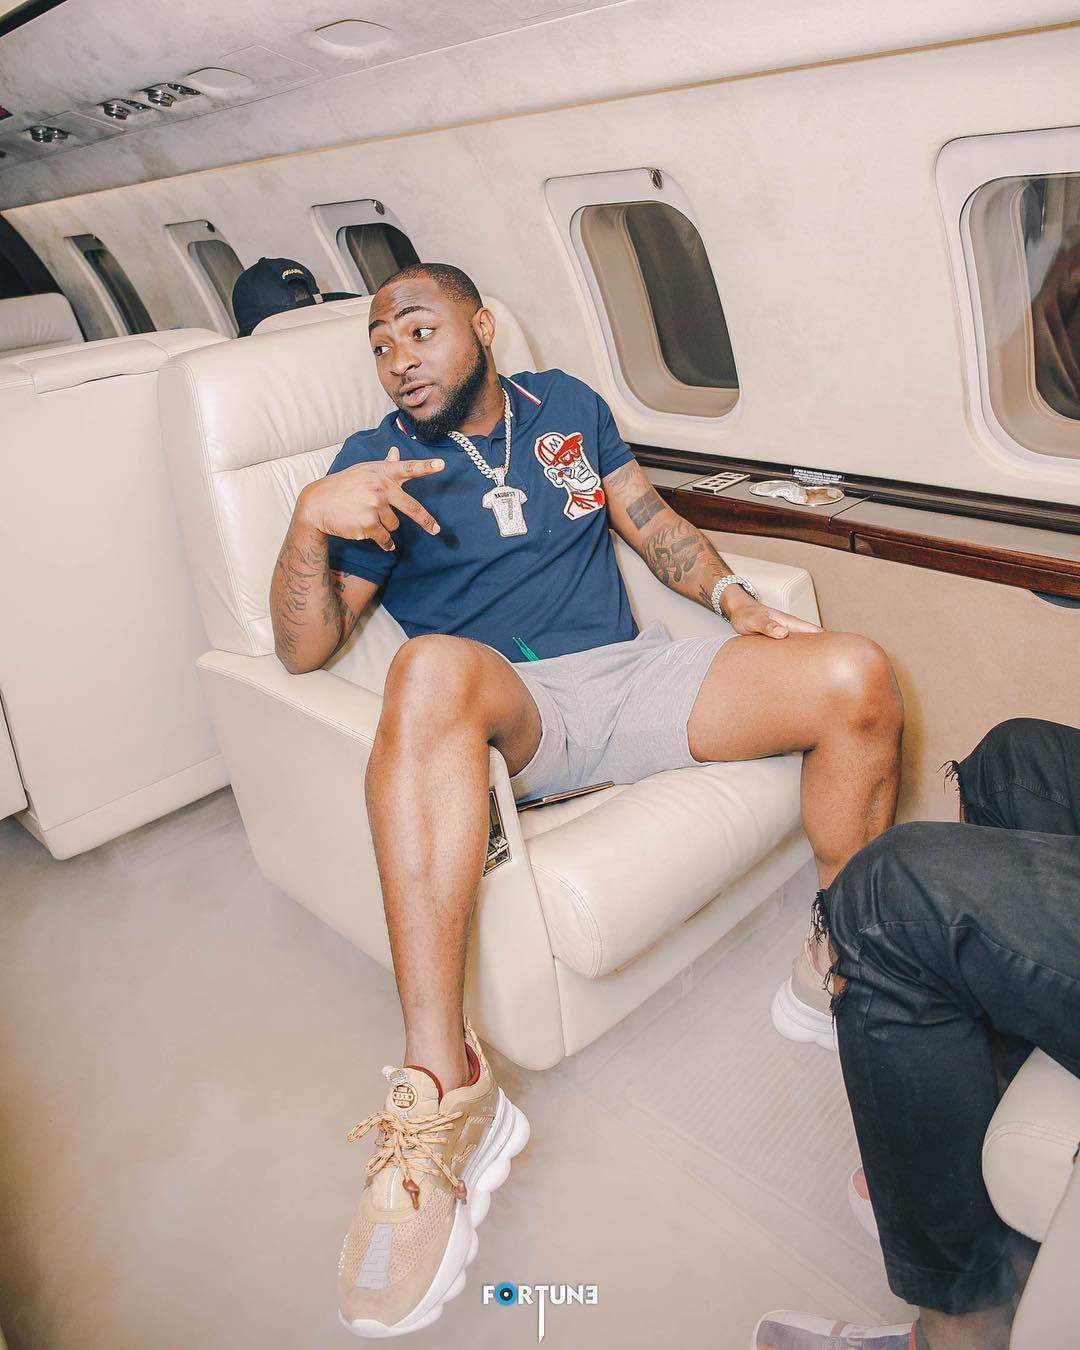 New report claims that Davido is allegedly dating & 'servicing' Ghanaian TV Presenter, Serwaa Amihere secretly